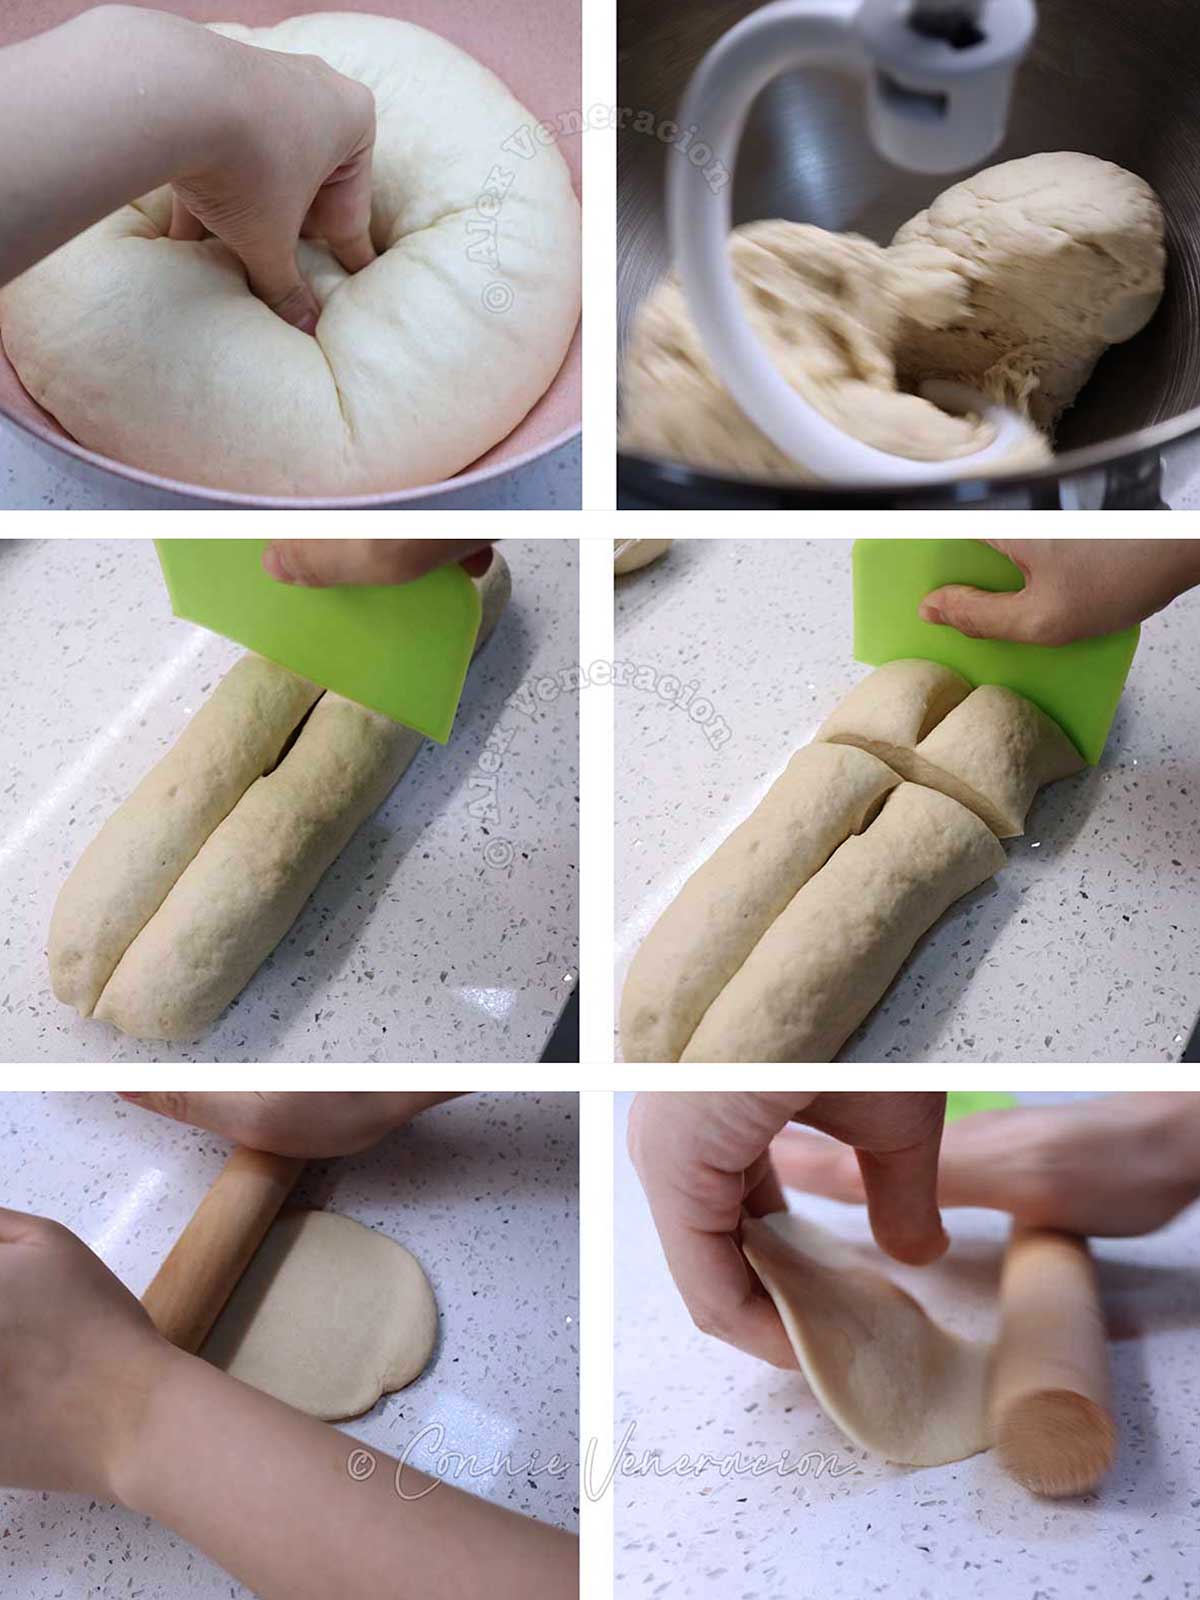 Rolling and flatting dough to make Home cooked Chinese steamed pork buns (baozi)